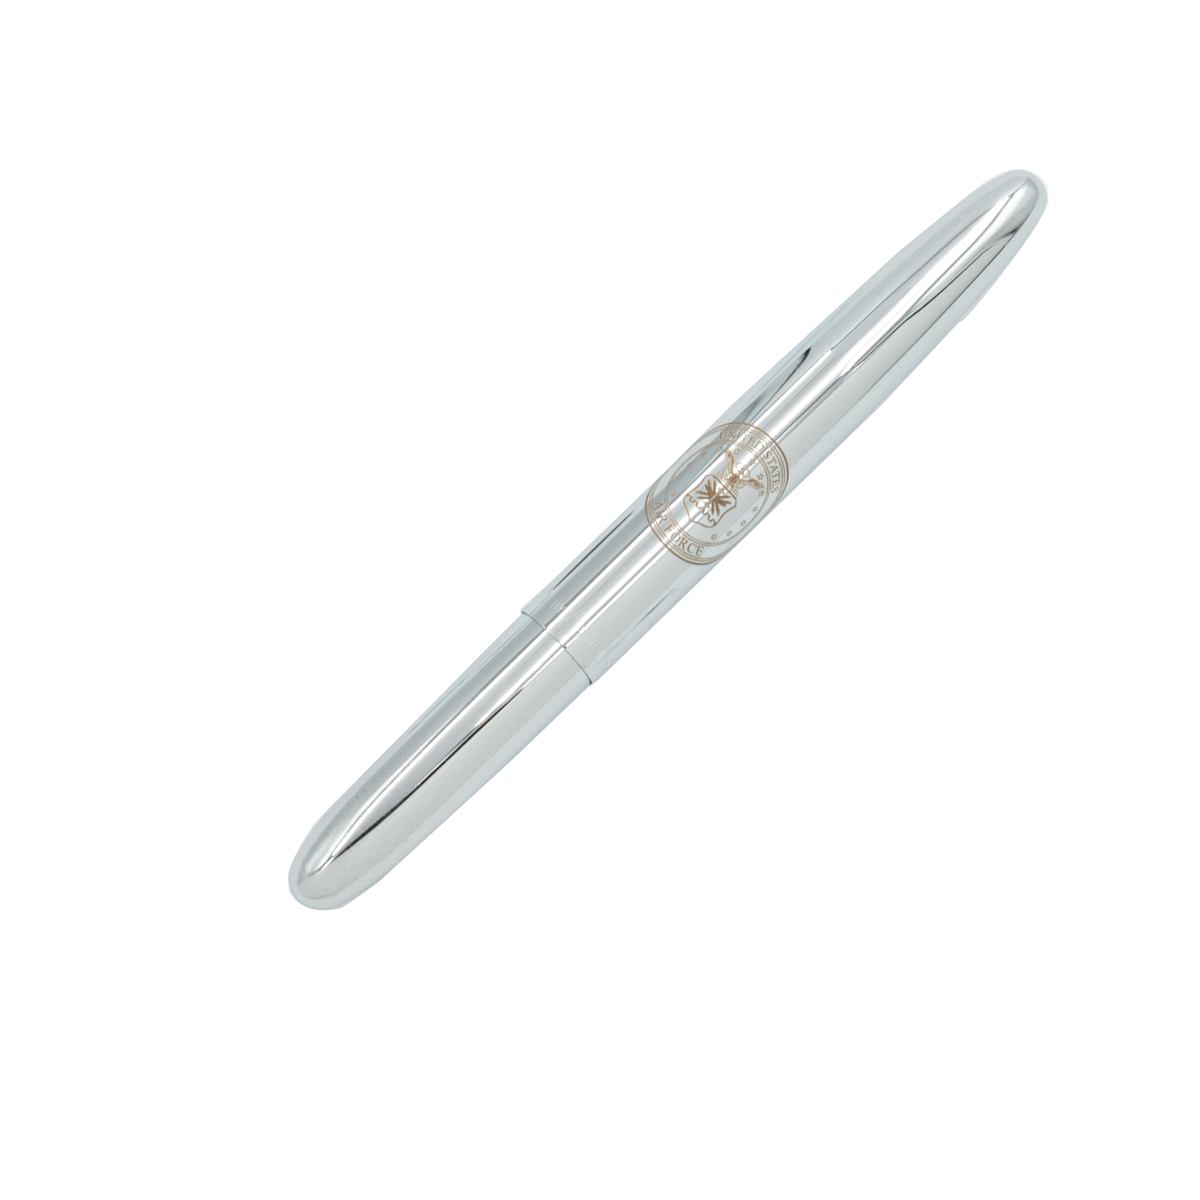 Fisher Space Pen Bullet - Chrome with Air Force Insignia